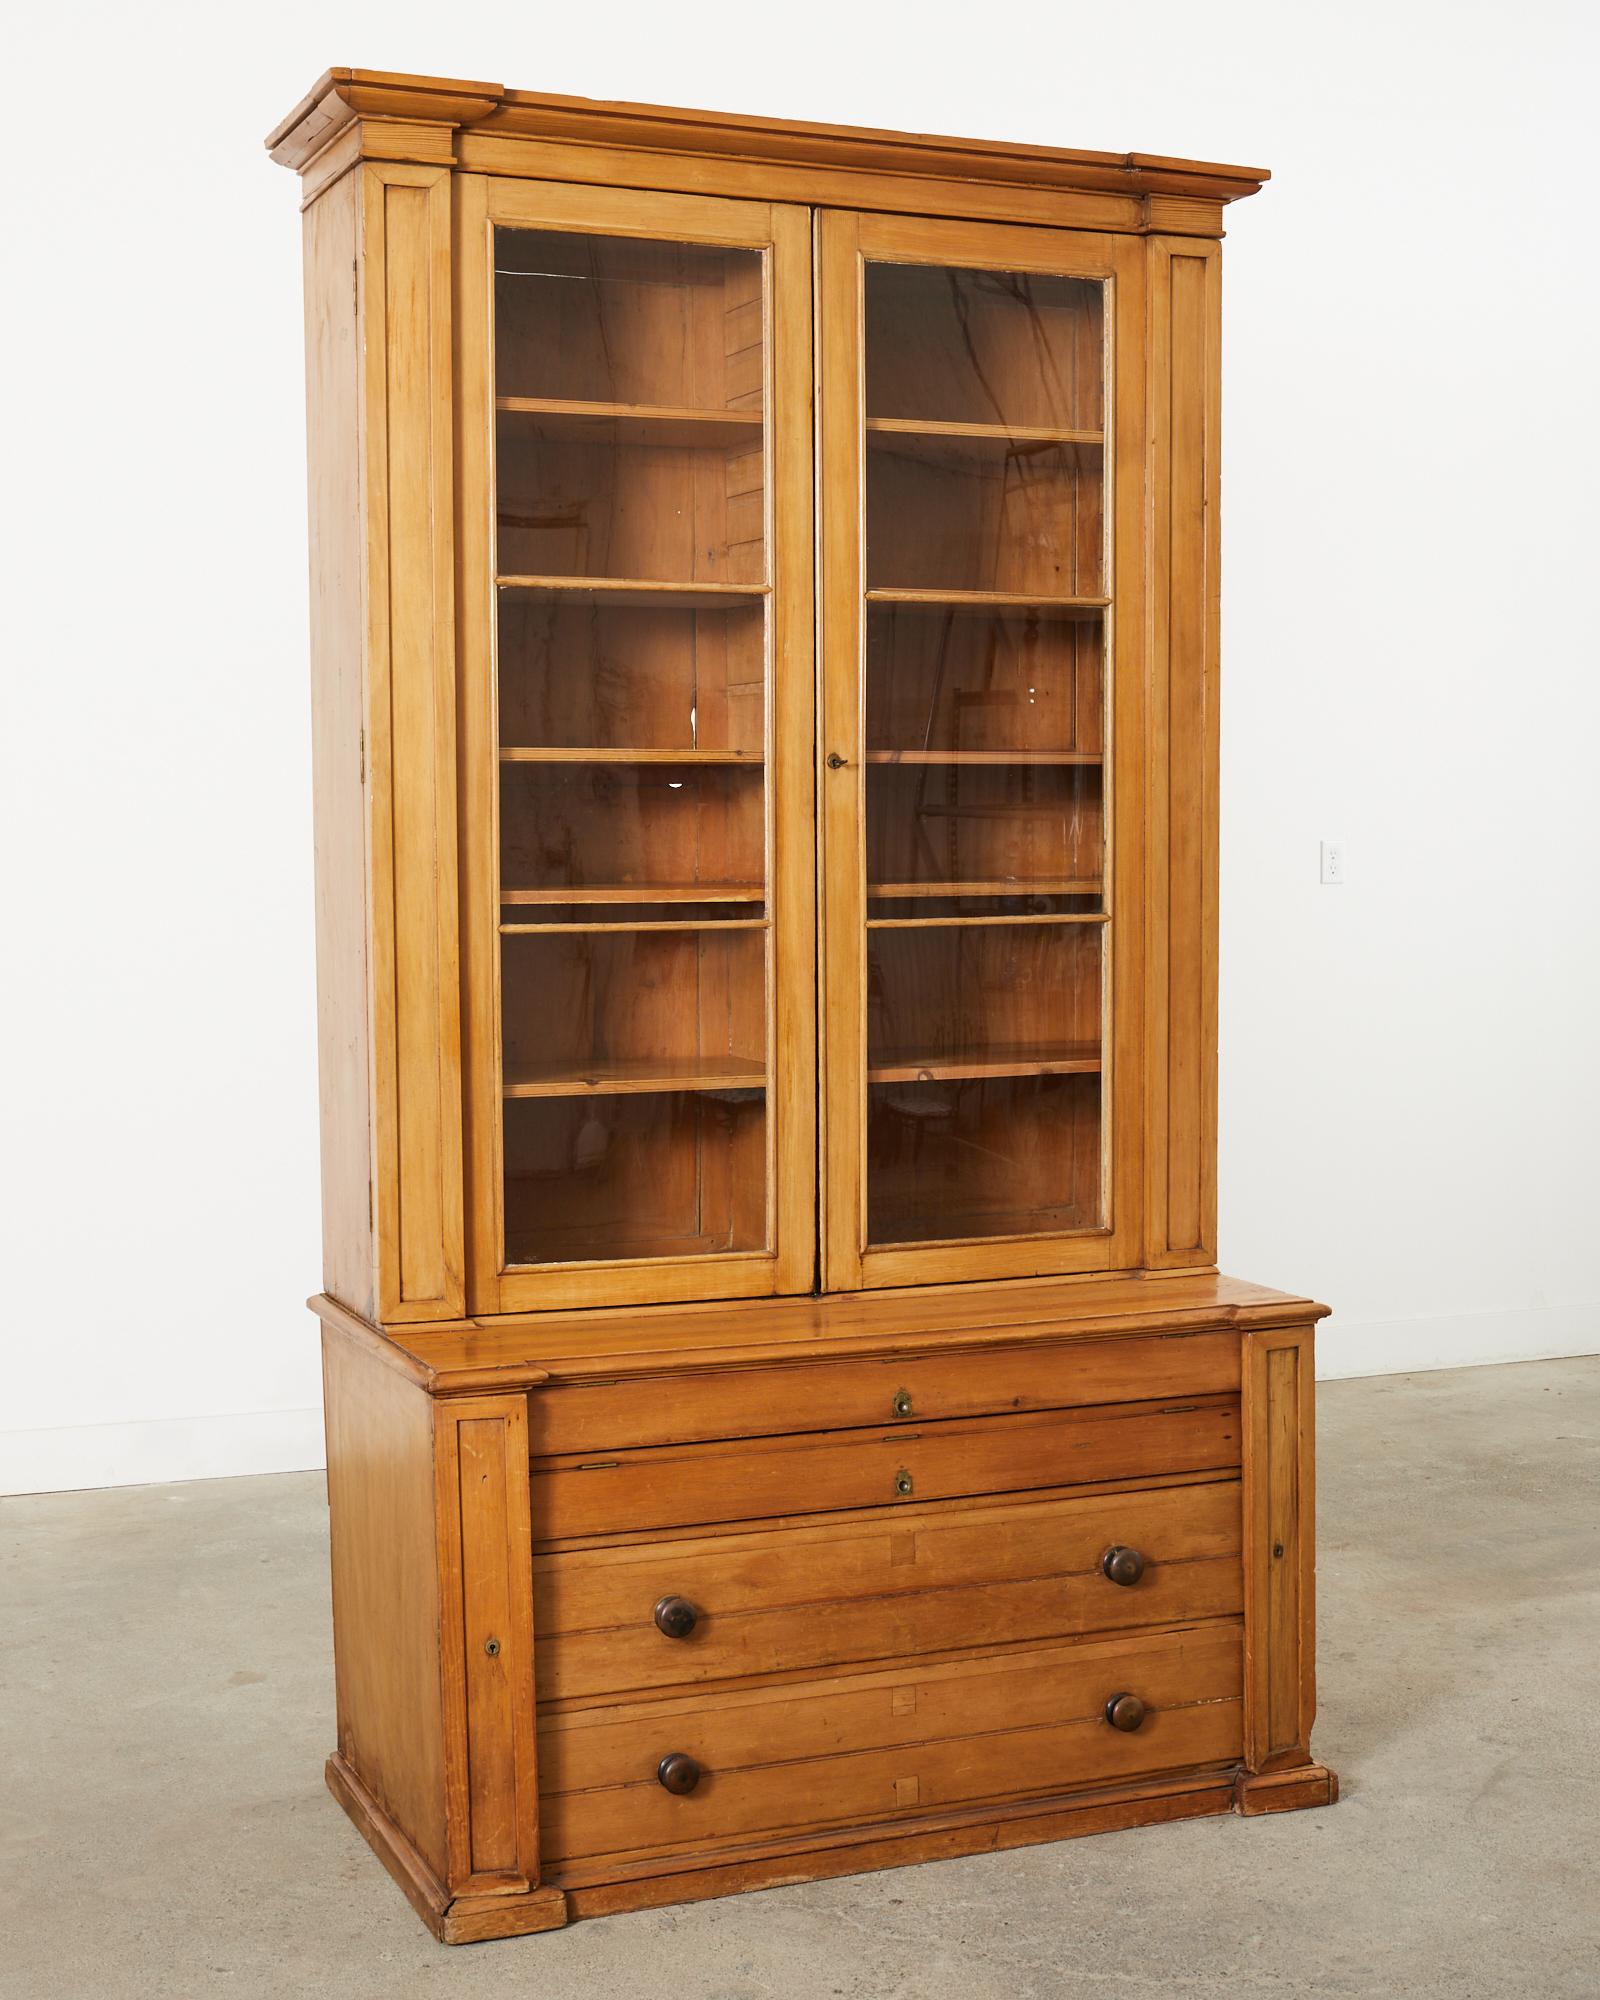 Unique 19th century country English library bookcase or cabinet crafted from fruitwood. The tall two-part case has a six shelf bookcase on the top featuring glazed doors. The bookcase is topped with a cornice molding. The bottom case is fronted by